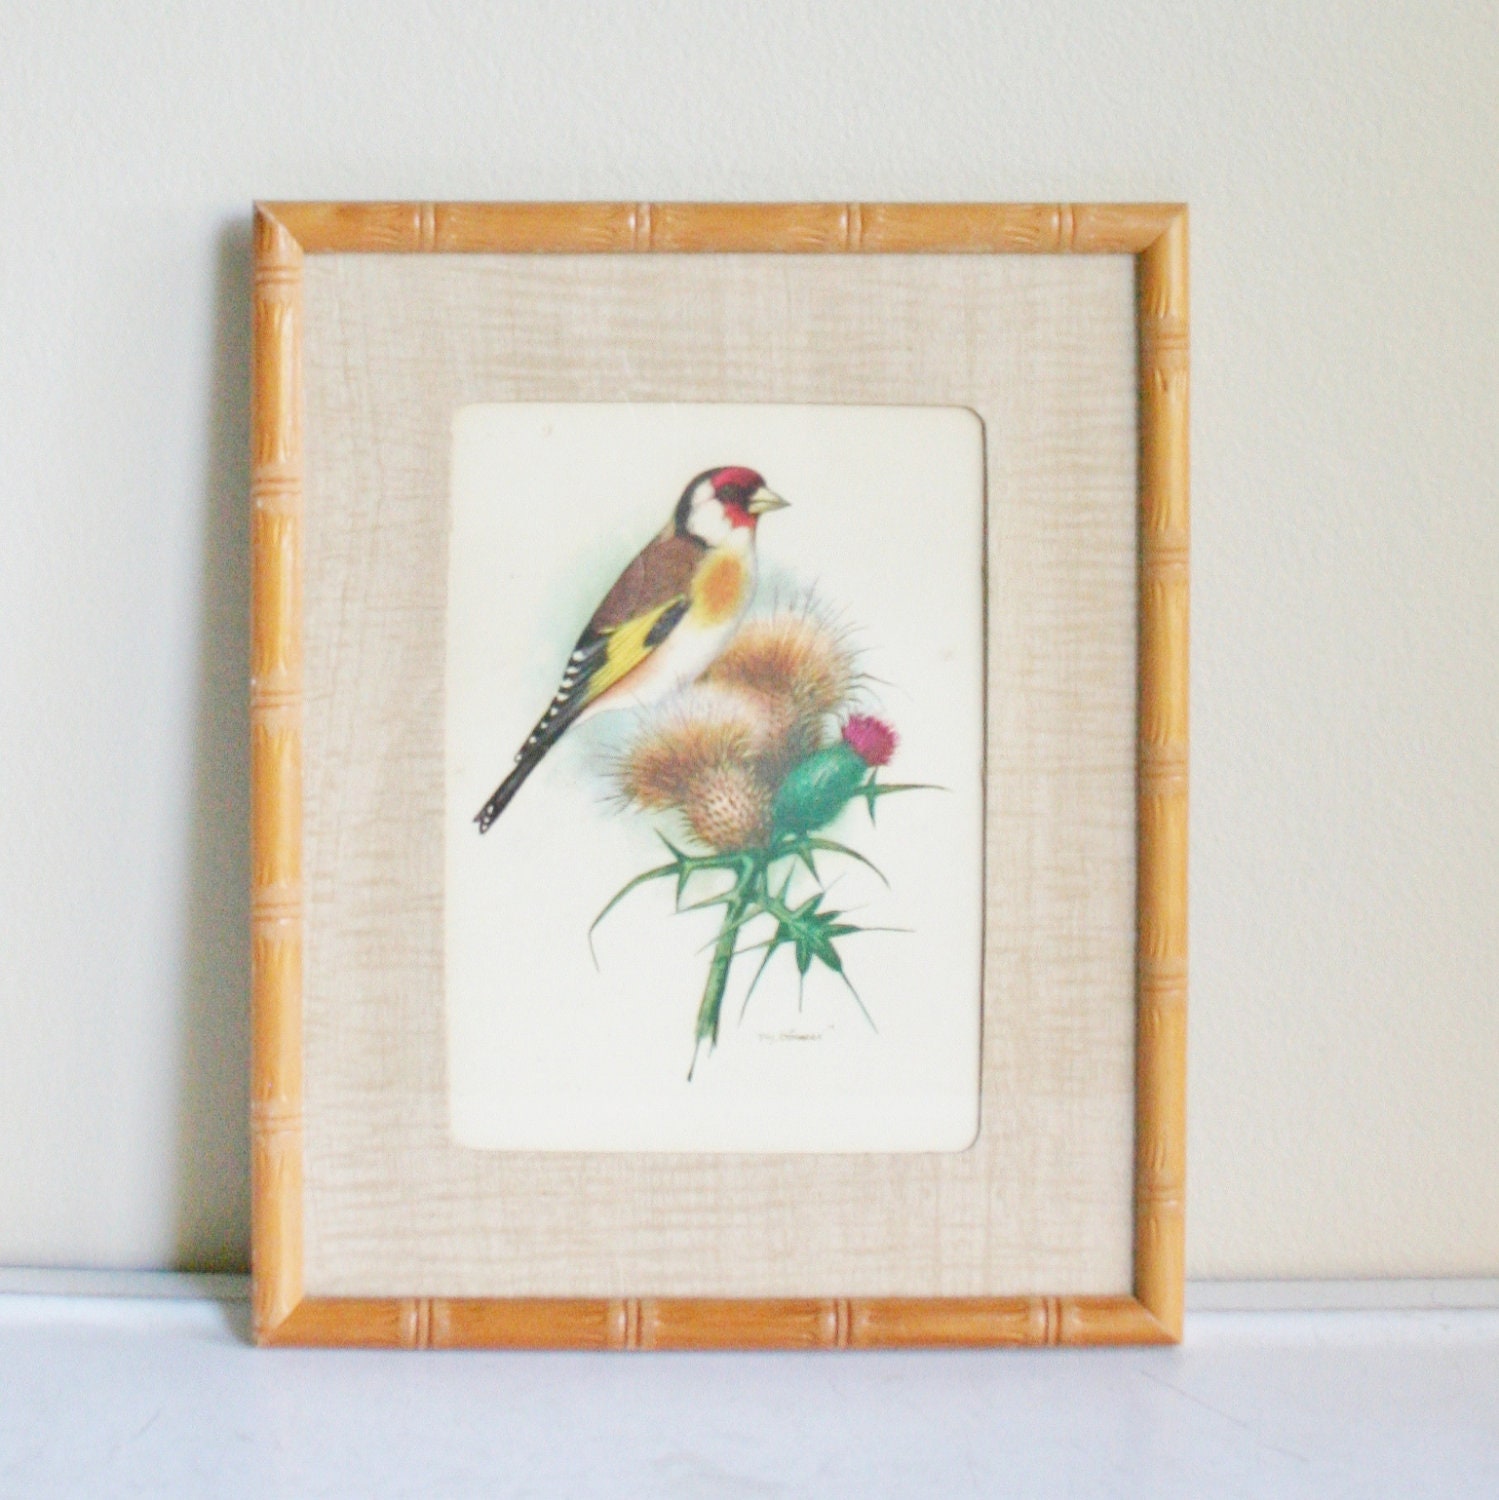 Vintage Framed Bird Print by tracinicole on Etsy